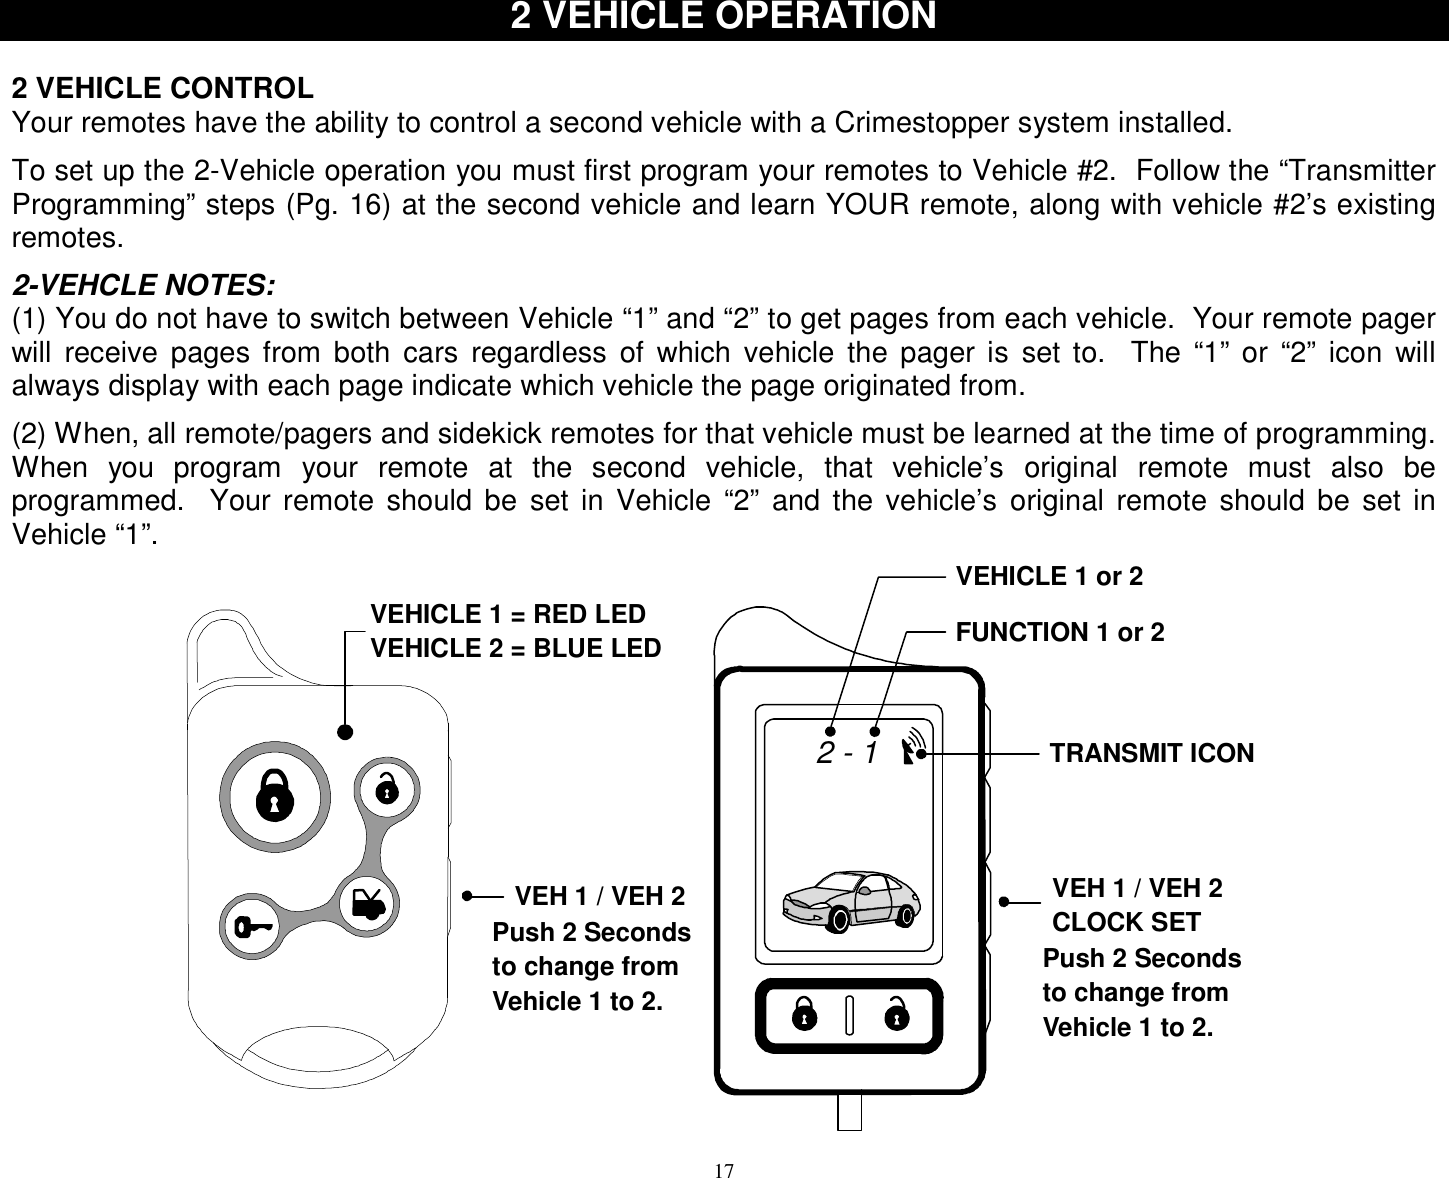  17 2 VEHICLE OPERATION   2 VEHICLE CONTROL Your remotes have the ability to control a second vehicle with a Crimestopper system installed.  To set up the 2-Vehicle operation you must first program your remotes to Vehicle #2.  Follow the “Transmitter Programming” steps (Pg. 16) at the second vehicle and learn YOUR remote, along with vehicle #2’s existing remotes.  2-VEHCLE NOTES: (1) You do not have to switch between Vehicle “1” and “2” to get pages from each vehicle.  Your remote pager will receive pages from both cars regardless of which vehicle the pager is set to.  The “1” or “2” icon will always display with each page indicate which vehicle the page originated from.  (2) When, all remote/pagers and sidekick remotes for that vehicle must be learned at the time of programming.  When you program your remote at the second vehicle, that vehicle’s original remote must also be programmed.  Your remote should be set in Vehicle “2” and the vehicle’s original remote should be set in Vehicle “1”. TRANSMIT ICONVEHICLE 1 or 2FUNCTION 1 or 2VEH 1 / VEH 2CLOCK SET2 - 1VEHICLE 1 = RED LEDVEHICLE 2 = BLUE LEDVEH 1 / VEH 2Push 2 Secondsto change fromVehicle 1 to 2.Push 2 Secondsto change fromVehicle 1 to 2. 